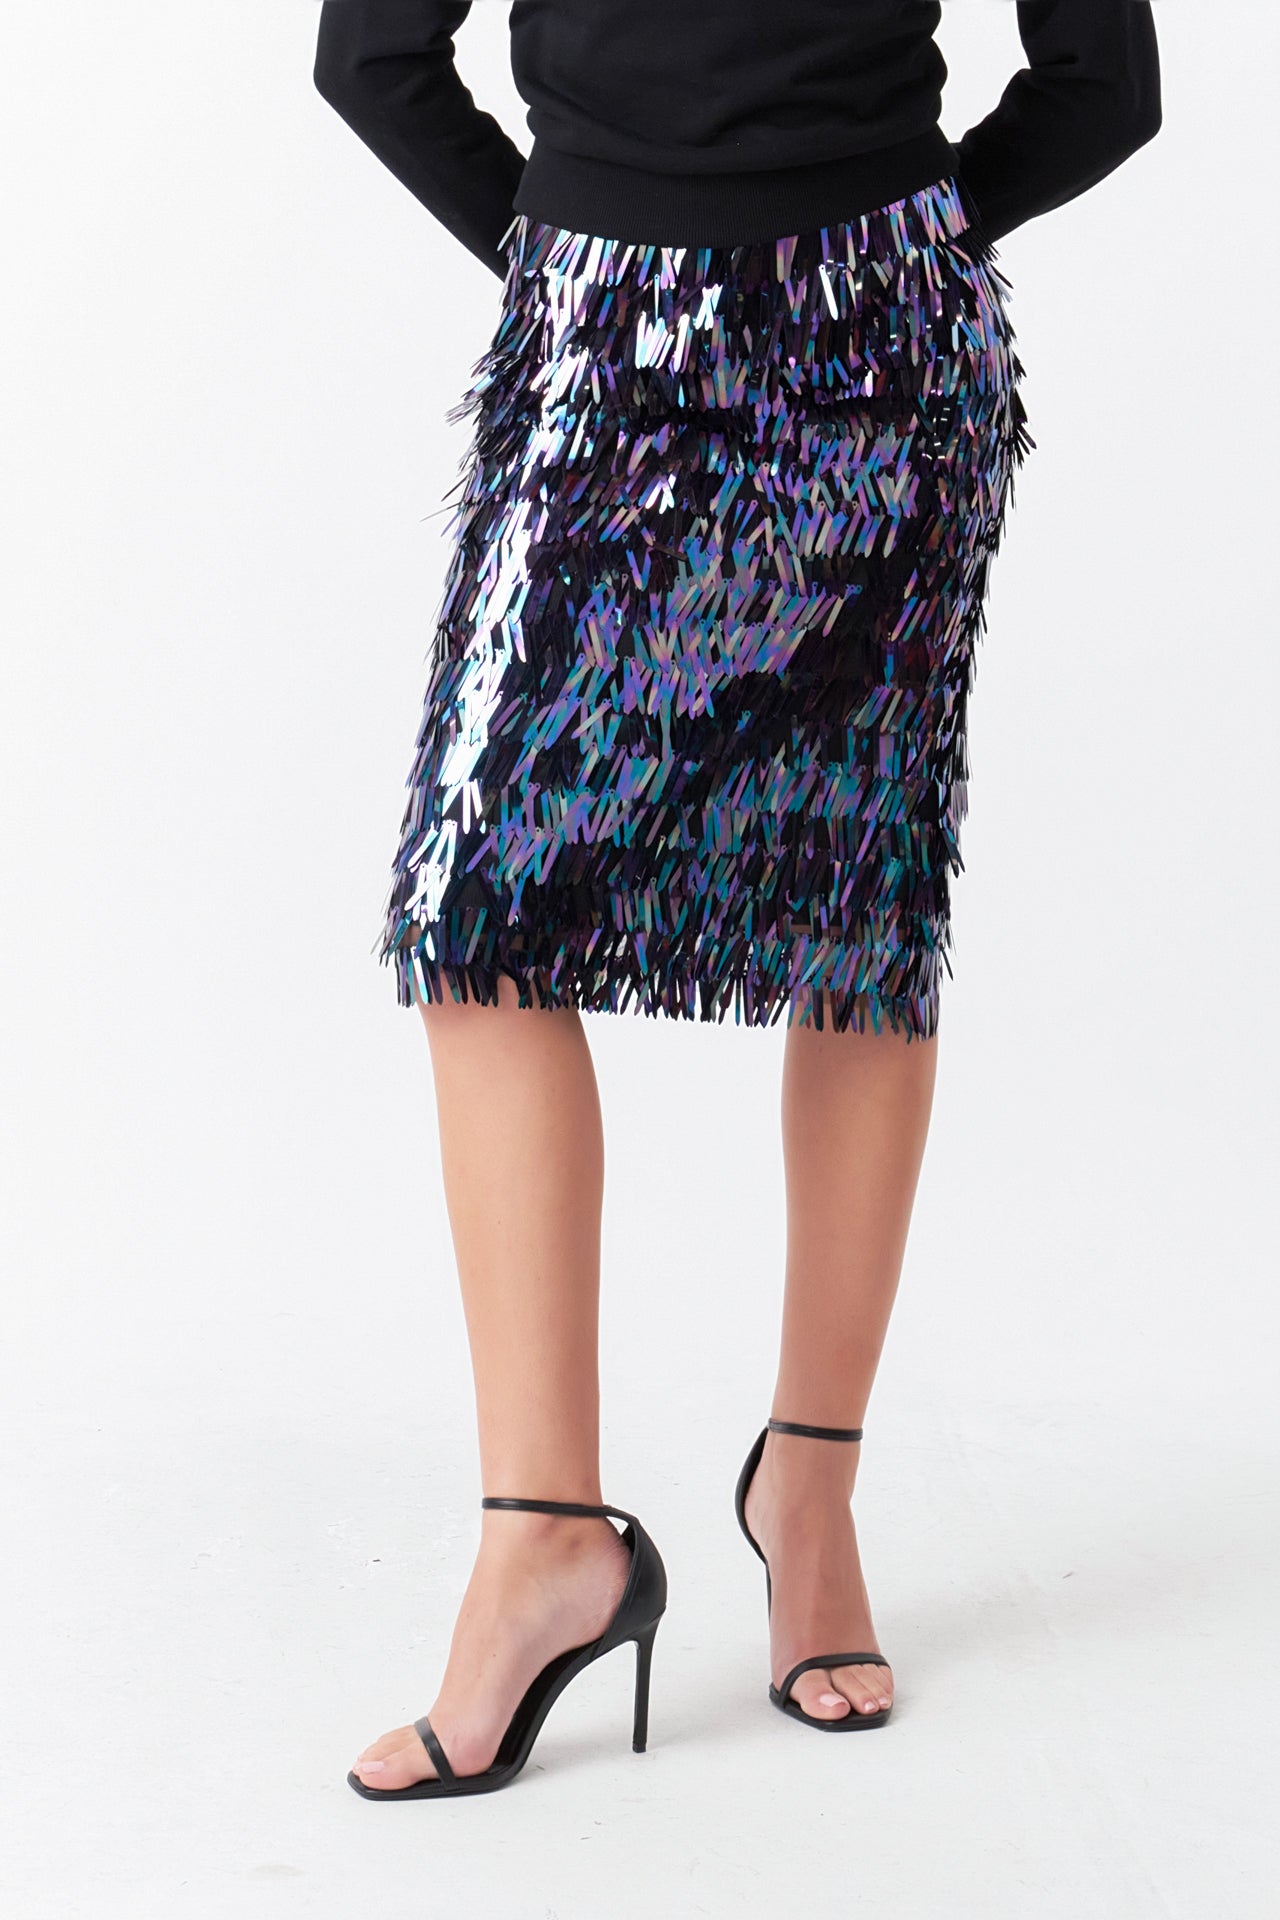 ENDLESS ROSE - Sequin Midi Skirt - SKIRTS available at Objectrare